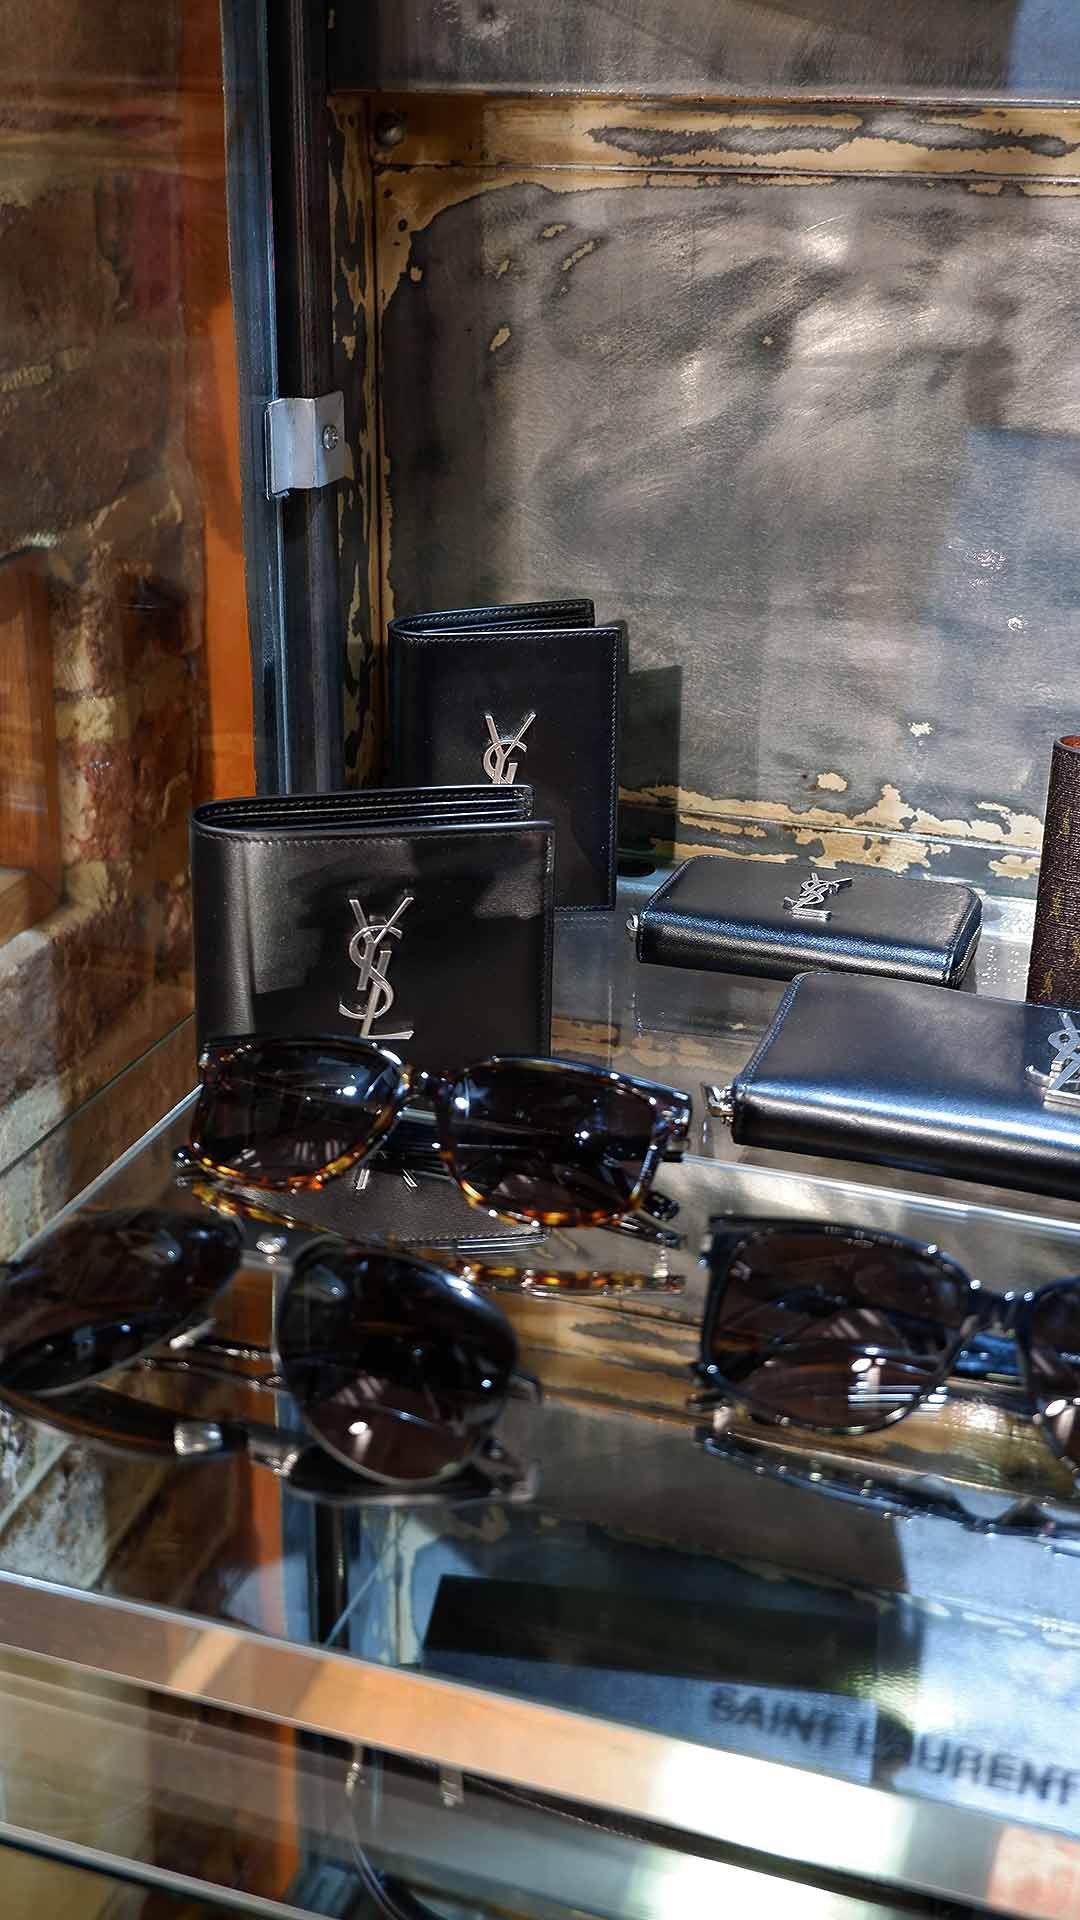 Zoo Fashions. Brick-and-mortar mens designer clothing store in Ilford Essex. Store Interior. Stockist of designer brands including Saint Laurent, ranging from ready-to-wear to accessories like Sunglasses SL599 and Cassandre Wallets